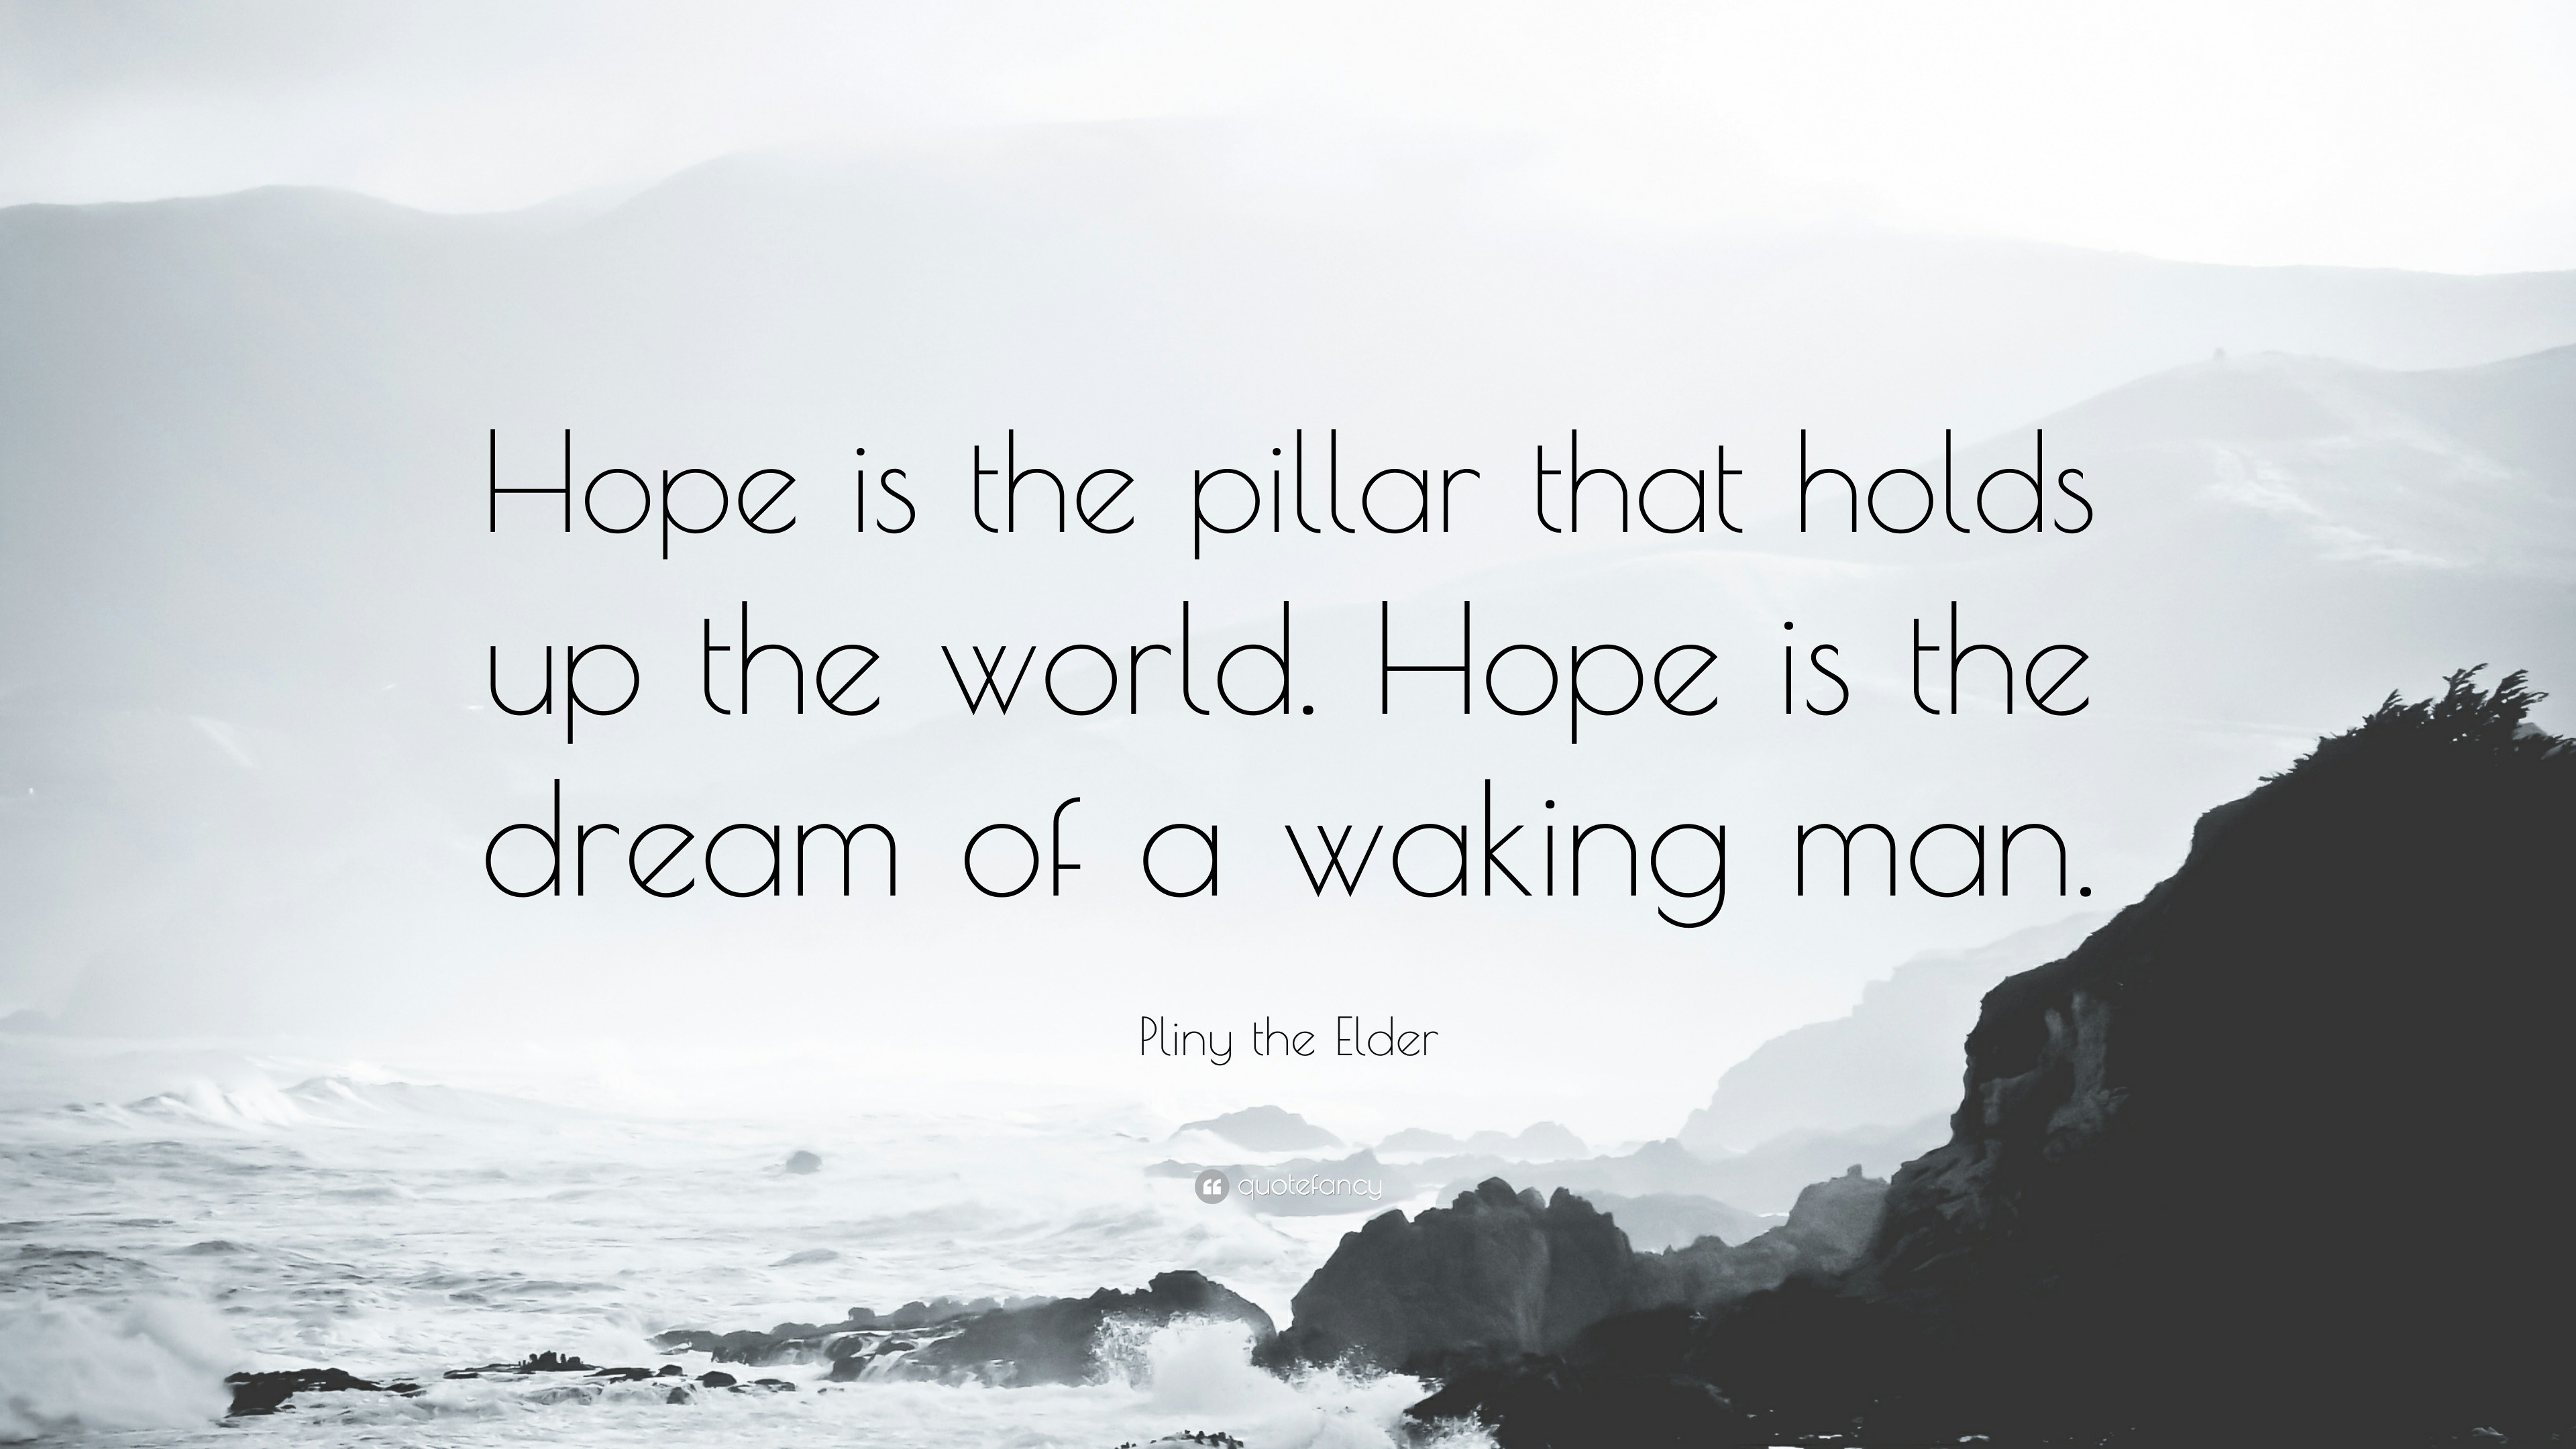 Quotes About Hope (40 wallpapers) - Quotefancy